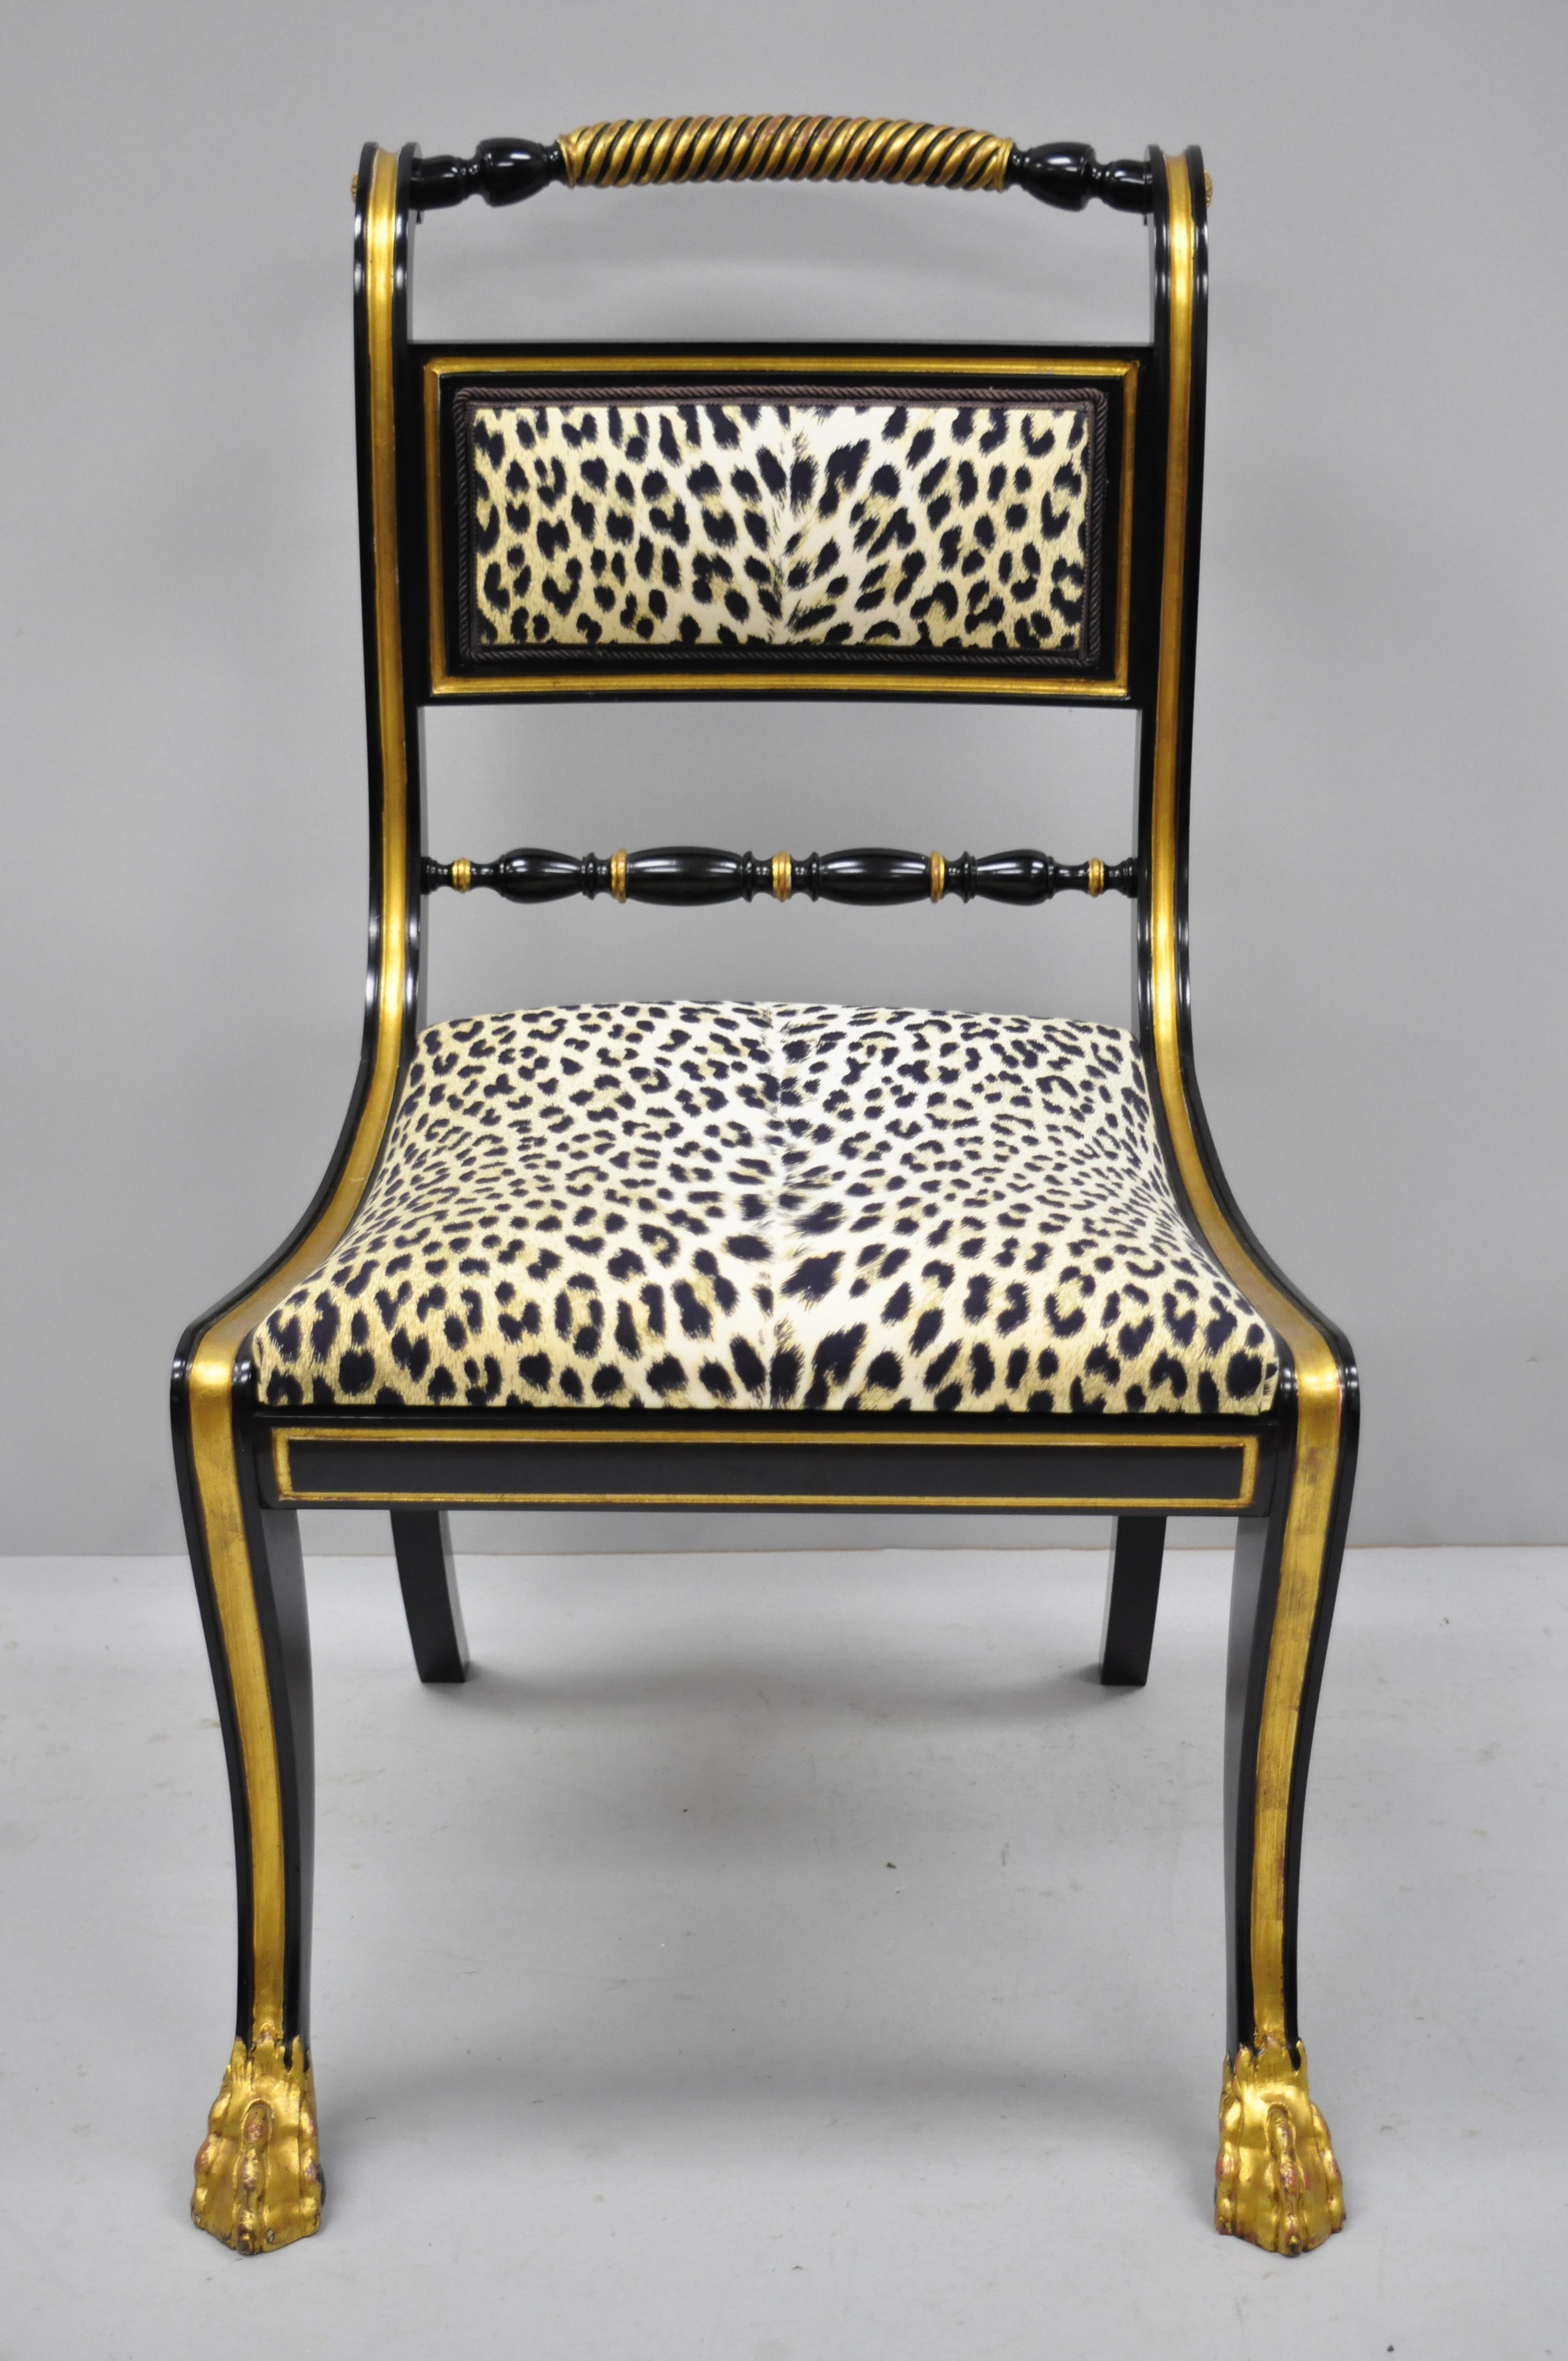 6 black and gold Regency style paw feet dining chairs leopard fabric. Listing includes hairy paw feet, distressed gold gilt finish, ebonized frames, cheetah/leopard print fabric, and solid wood construction; great style and form, circa mid-late 20th